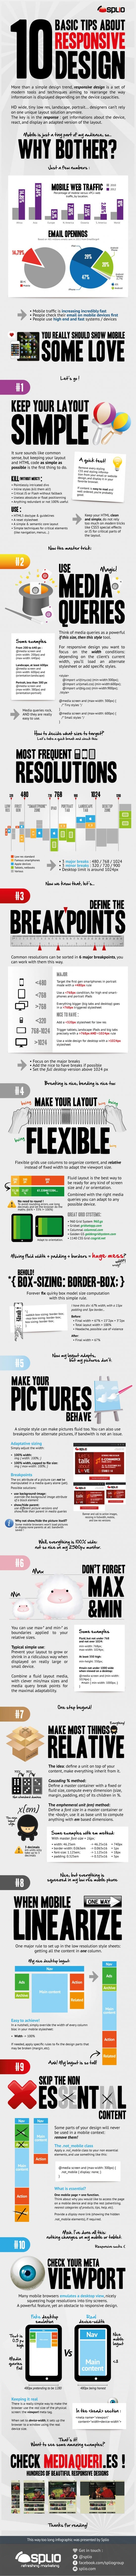 10_basic_tips_about_responsive_designsplioinfographic